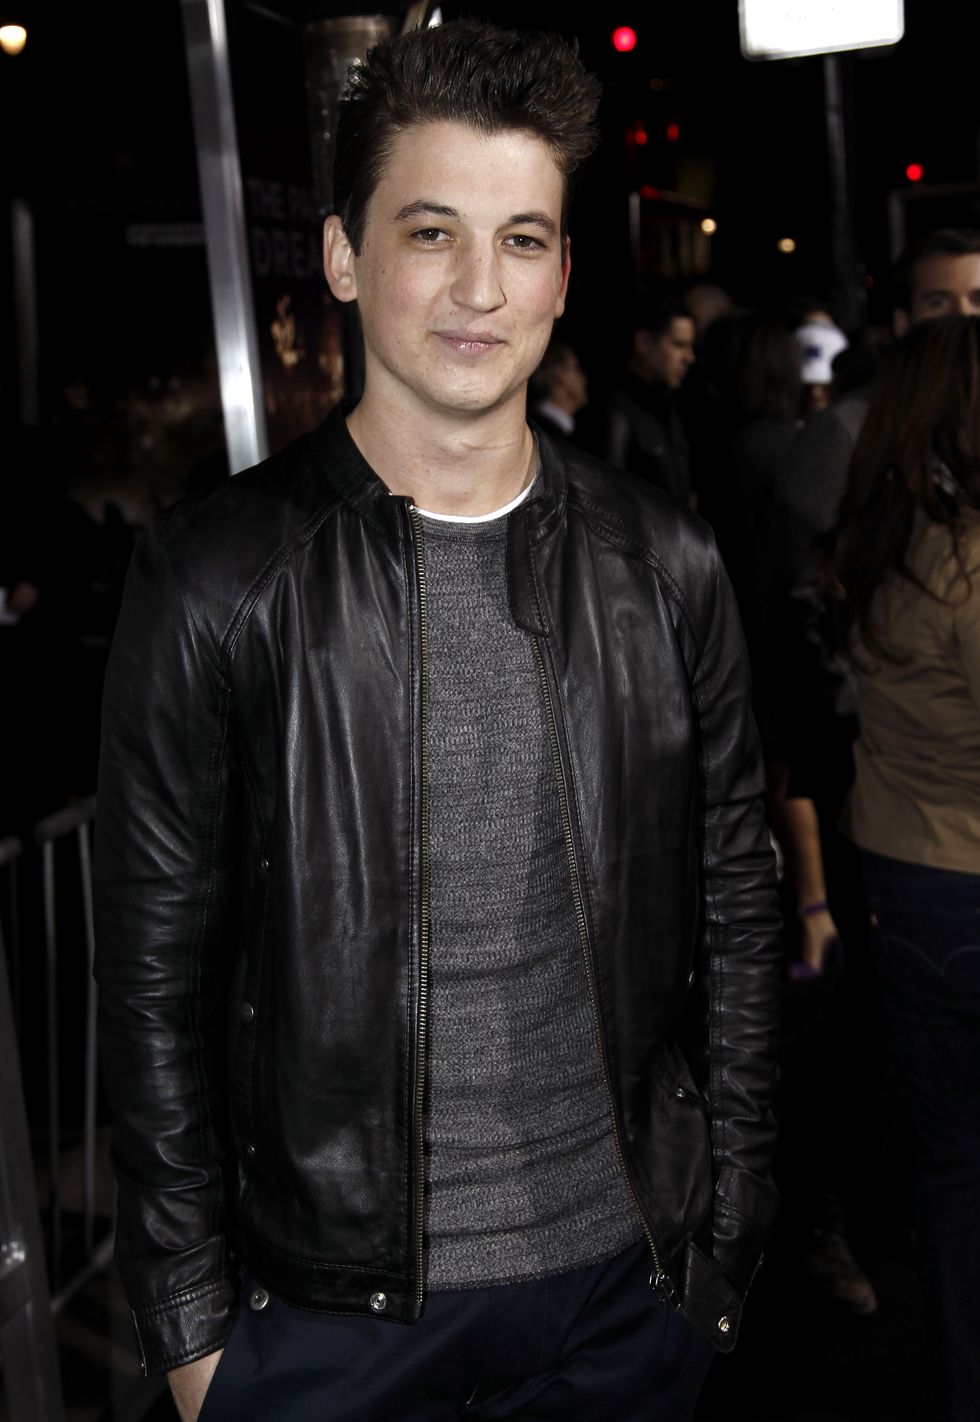 Miles Teller, Analeigh Tipton Have TWO NIGHT STAND - Official US